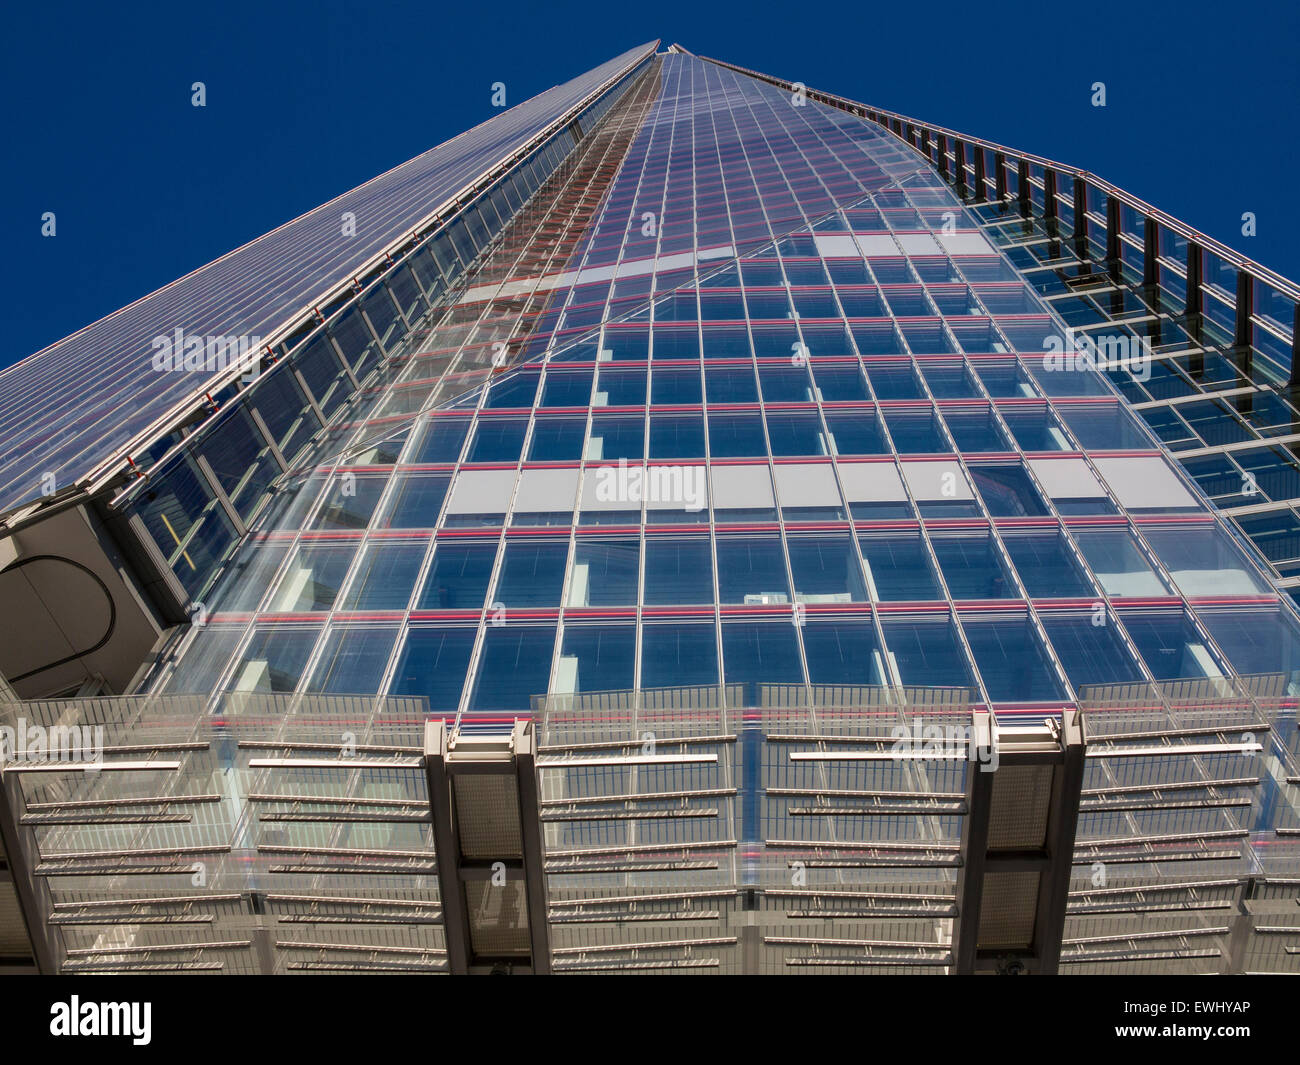 Looking directly up at the Shard in London Stock Photo